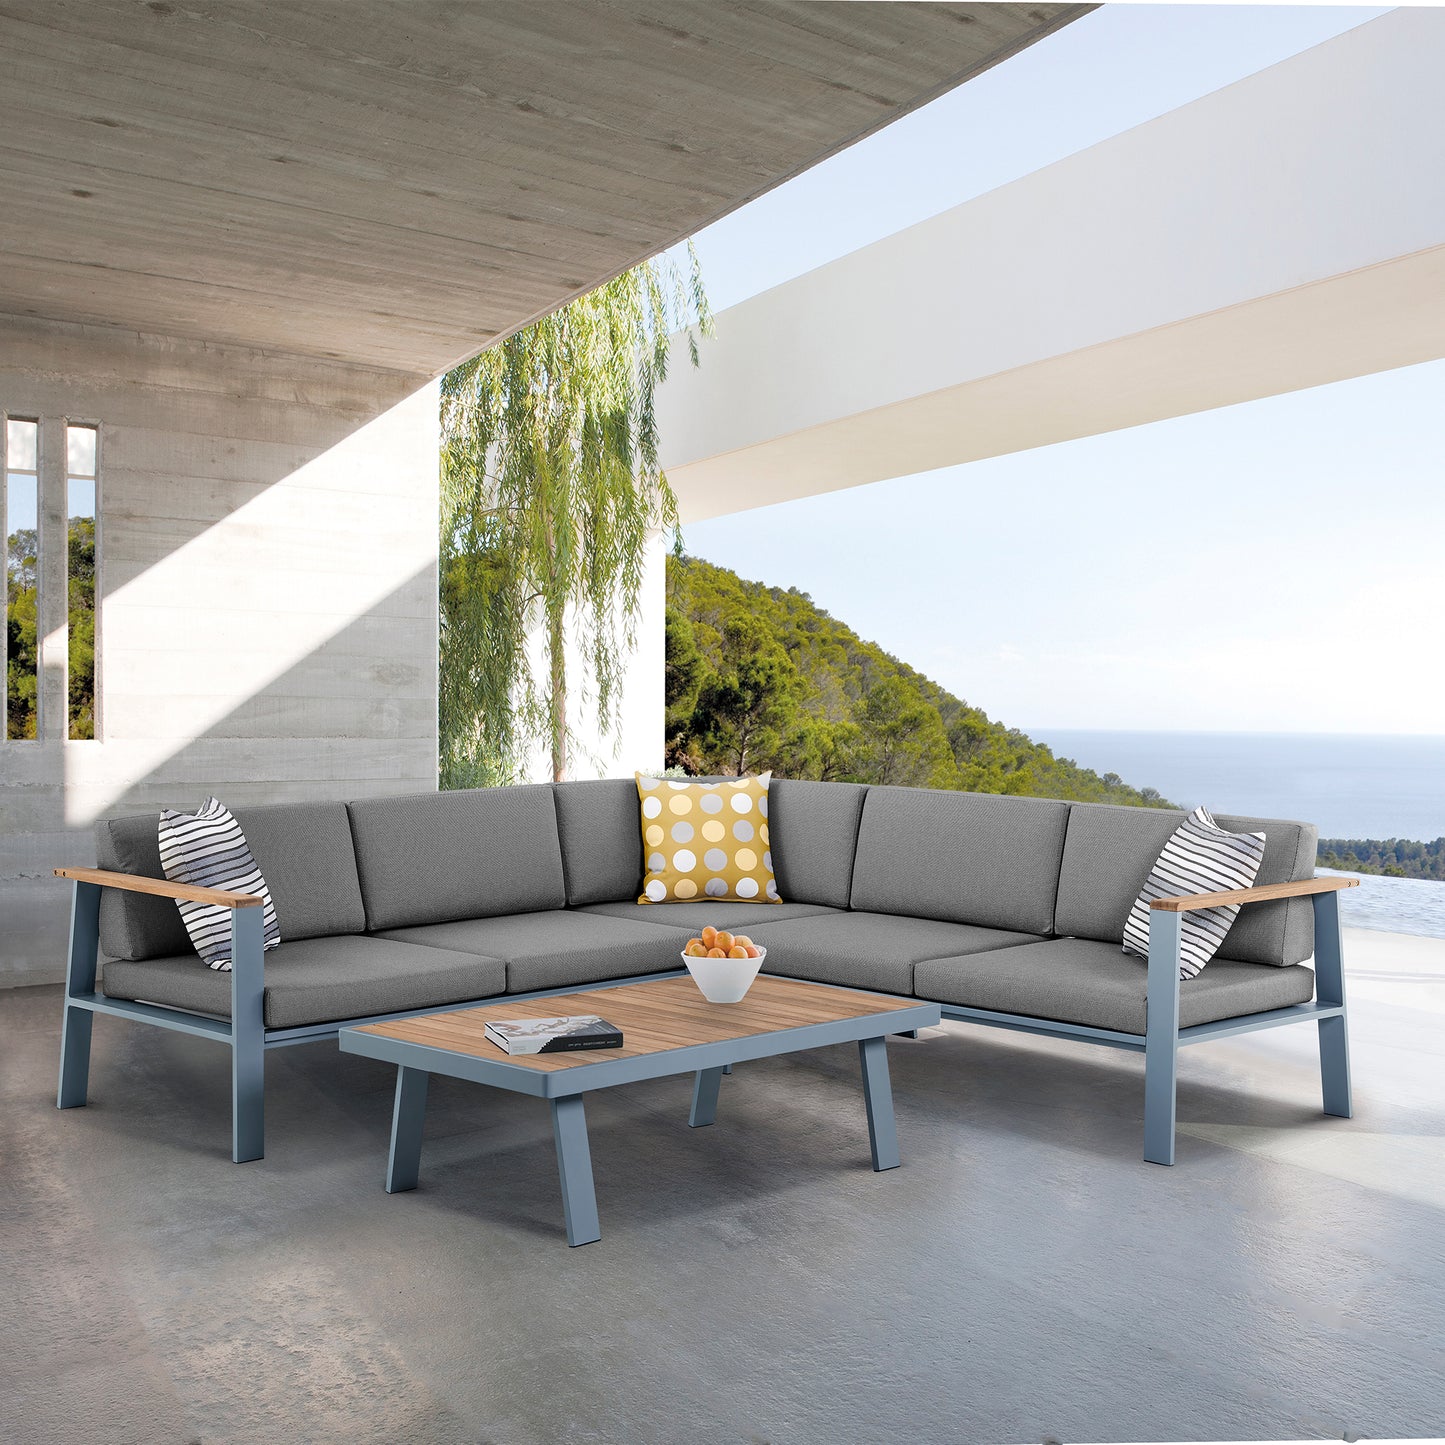 Nofi Outdoor Patio Sectional Set in Gray Finish with Gray Cushions and Teak Wood